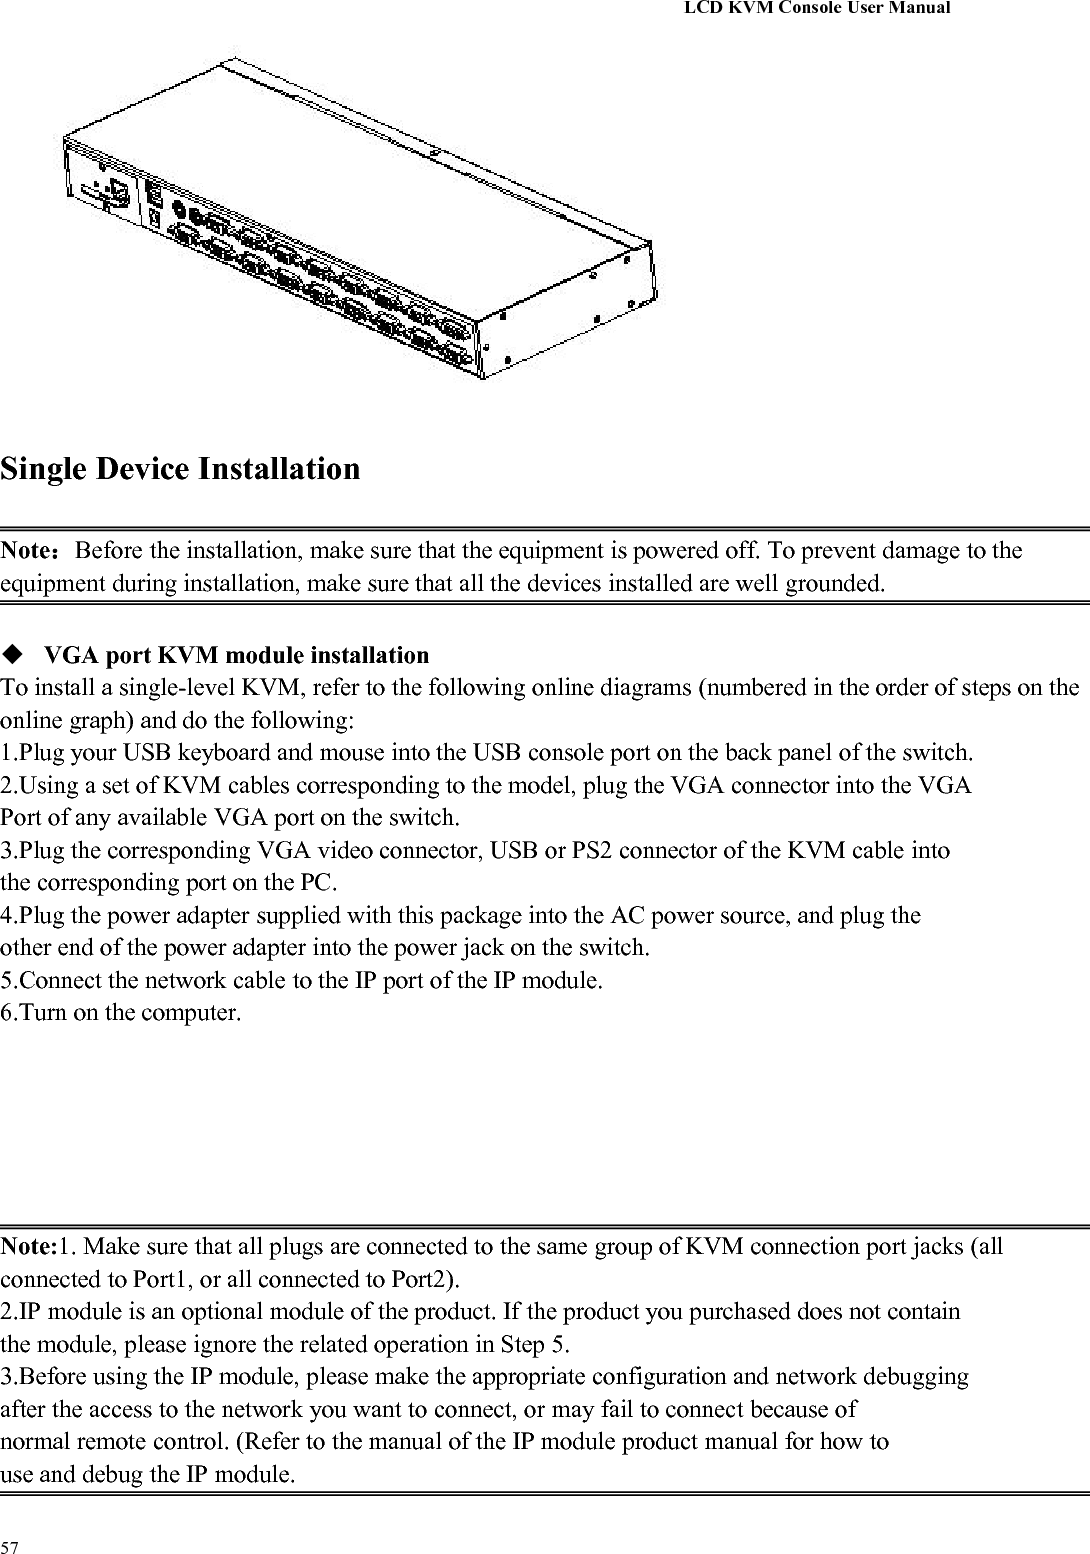 LCD KVM Console User Manual57Single Device InstallationNote：Before the installation, make sure that the equipment is powered off. To prevent damage to theequipment during installation, make sure that all the devices installed are well grounded.VGA port KVM module installationTo install a single-level KVM, refer to the following online diagrams (numbered in the order of steps on theonline graph) and do the following:1.Plug your USB keyboard and mouse into the USB console port on the back panel of the switch.2.Using a set of KVM cables corresponding to the model, plug the VGA connector into the VGAPort of any available VGA port on the switch.3.Plug the corresponding VGA video connector, USB or PS2 connector of the KVM cable intothe corresponding port on the PC.4.Plug the power adapter supplied with this package into the AC power source, and plug theother end of the power adapter into the power jack on the switch.5.Connect the network cable to the IP port of the IP module.6.Turn on the computer.Note:1. Make sure that all plugs are connected to the same group of KVM connection port jacks (allconnected to Port1, or all connected to Port2).2.IP module is an optional module of the product. If the product you purchased does not containthe module, please ignore the related operation in Step 5.3.Before using the IP module, please make the appropriate configuration and network debuggingafter the access to the network you want to connect, or may fail to connect because ofnormal remote control. (Refer to the manual of the IP module product manual for how touse and debug the IP module.